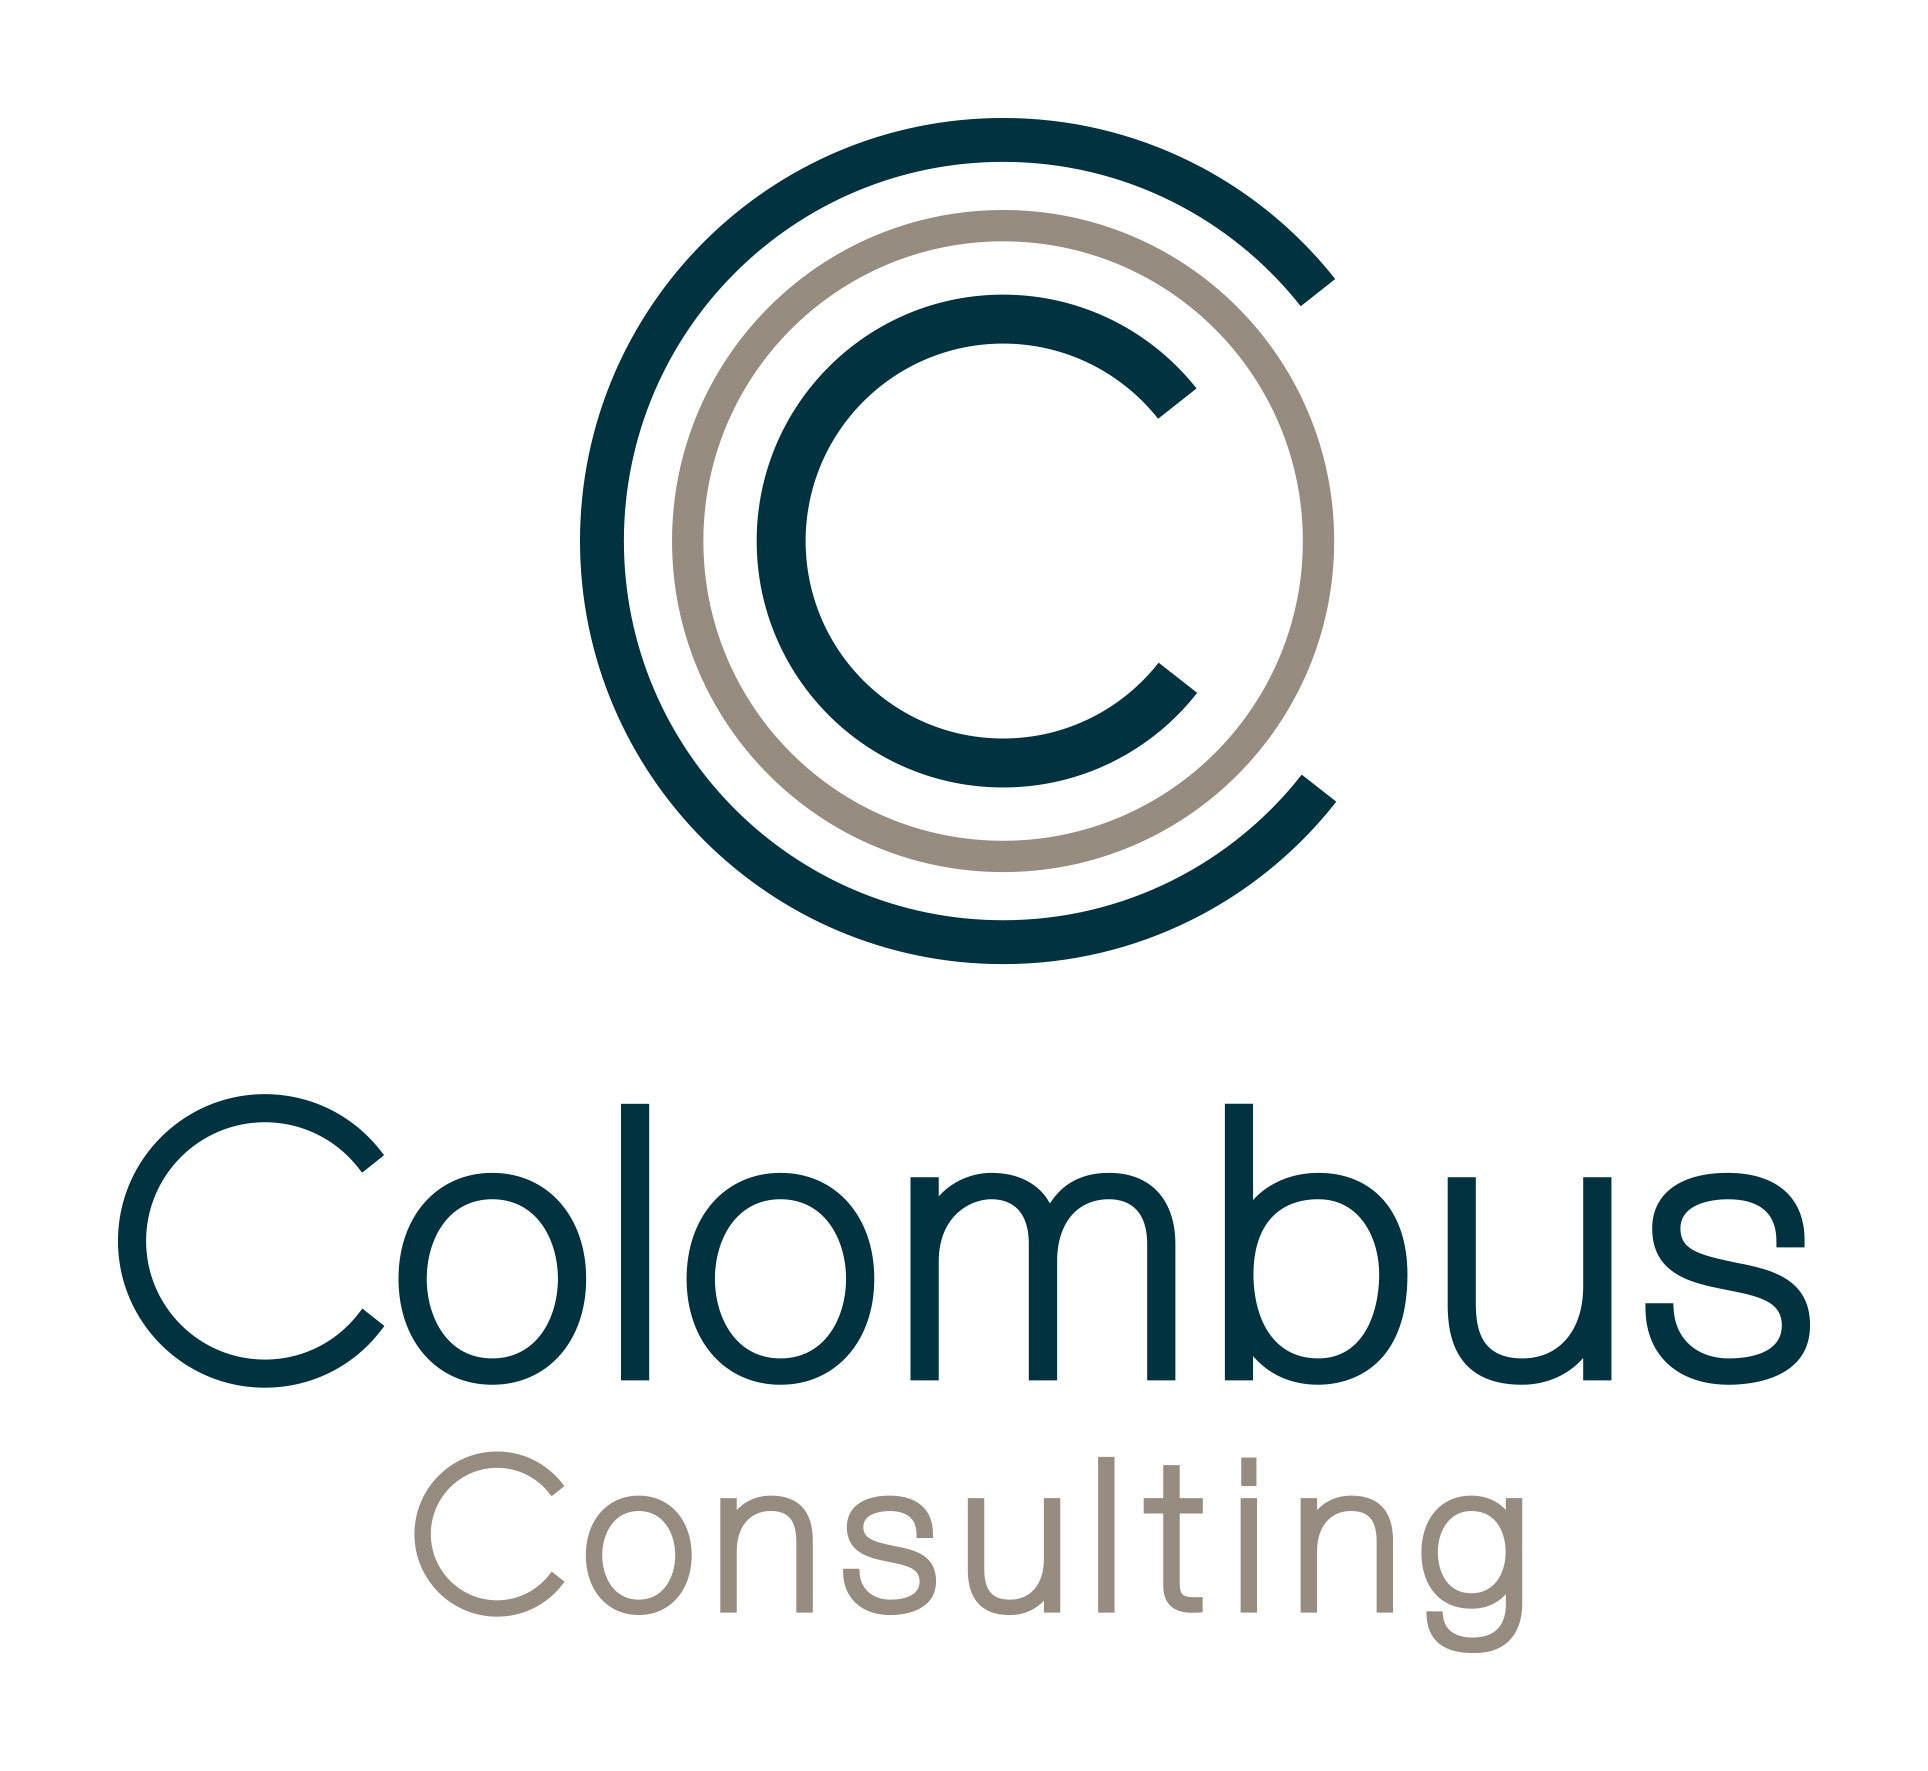 COLOMBUS CONSULTING SHIFT